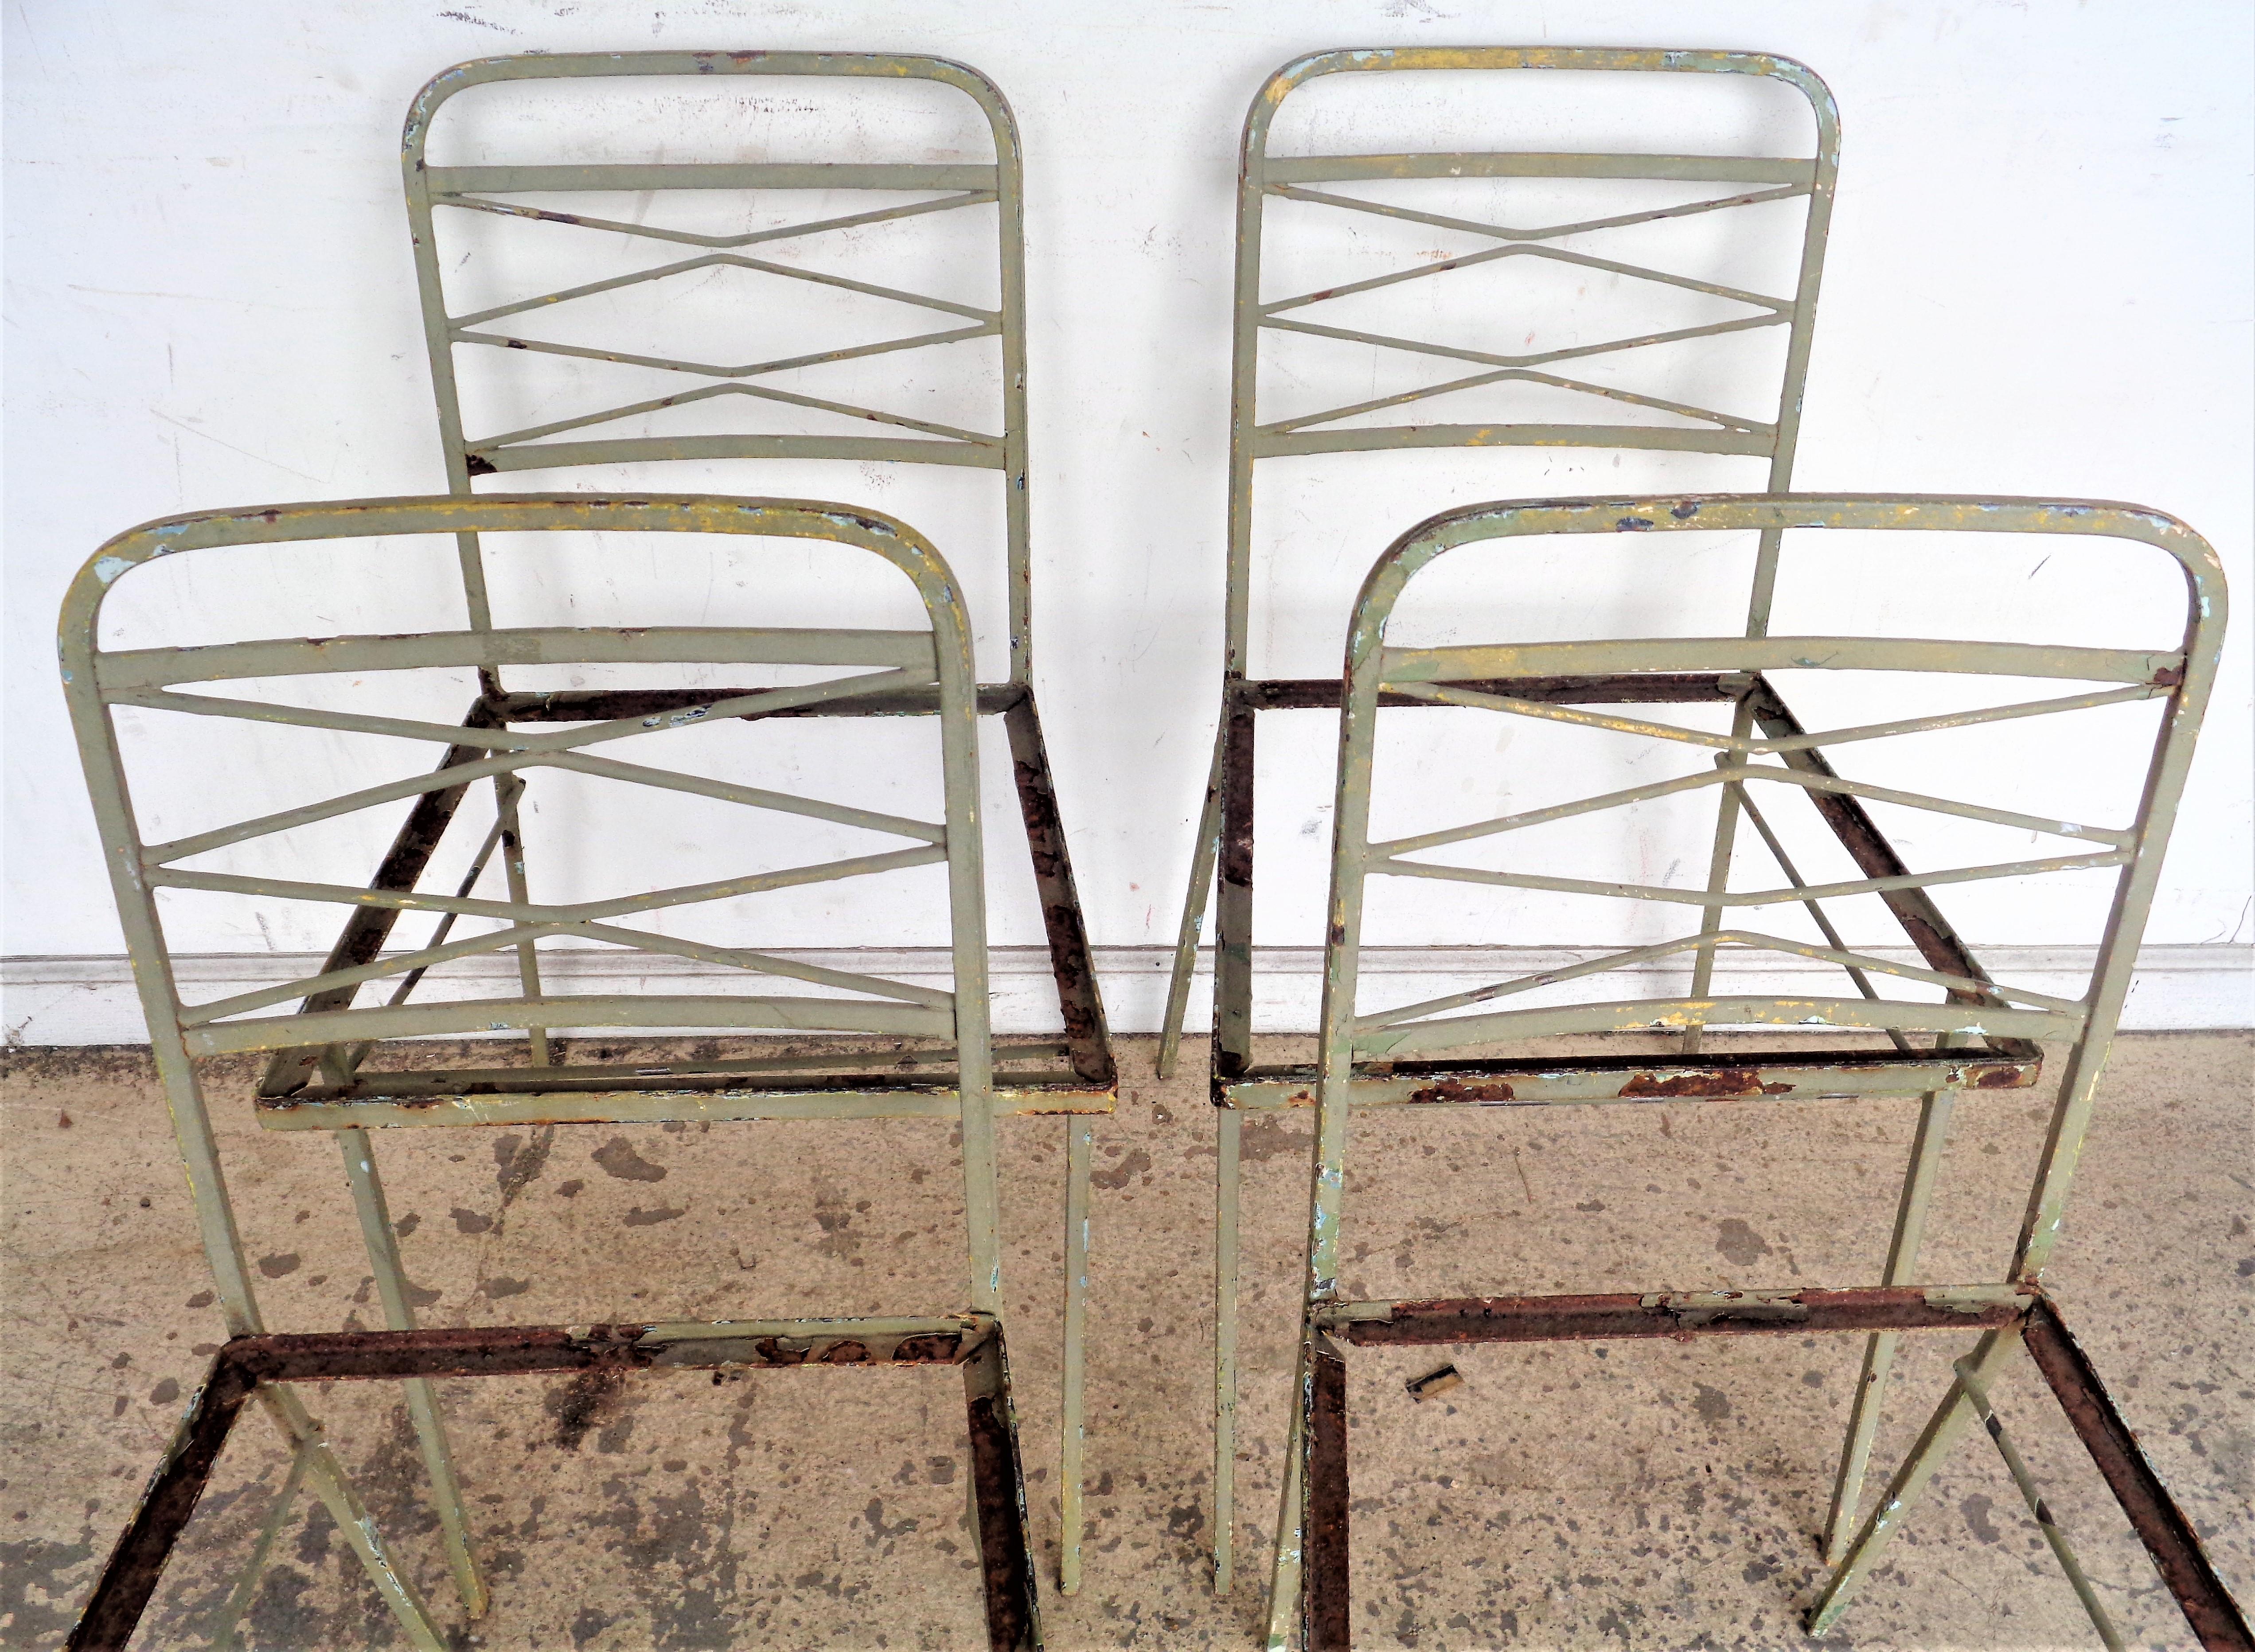   1940's Modernist Wrought Iron Chairs, Set of Four For Sale 3